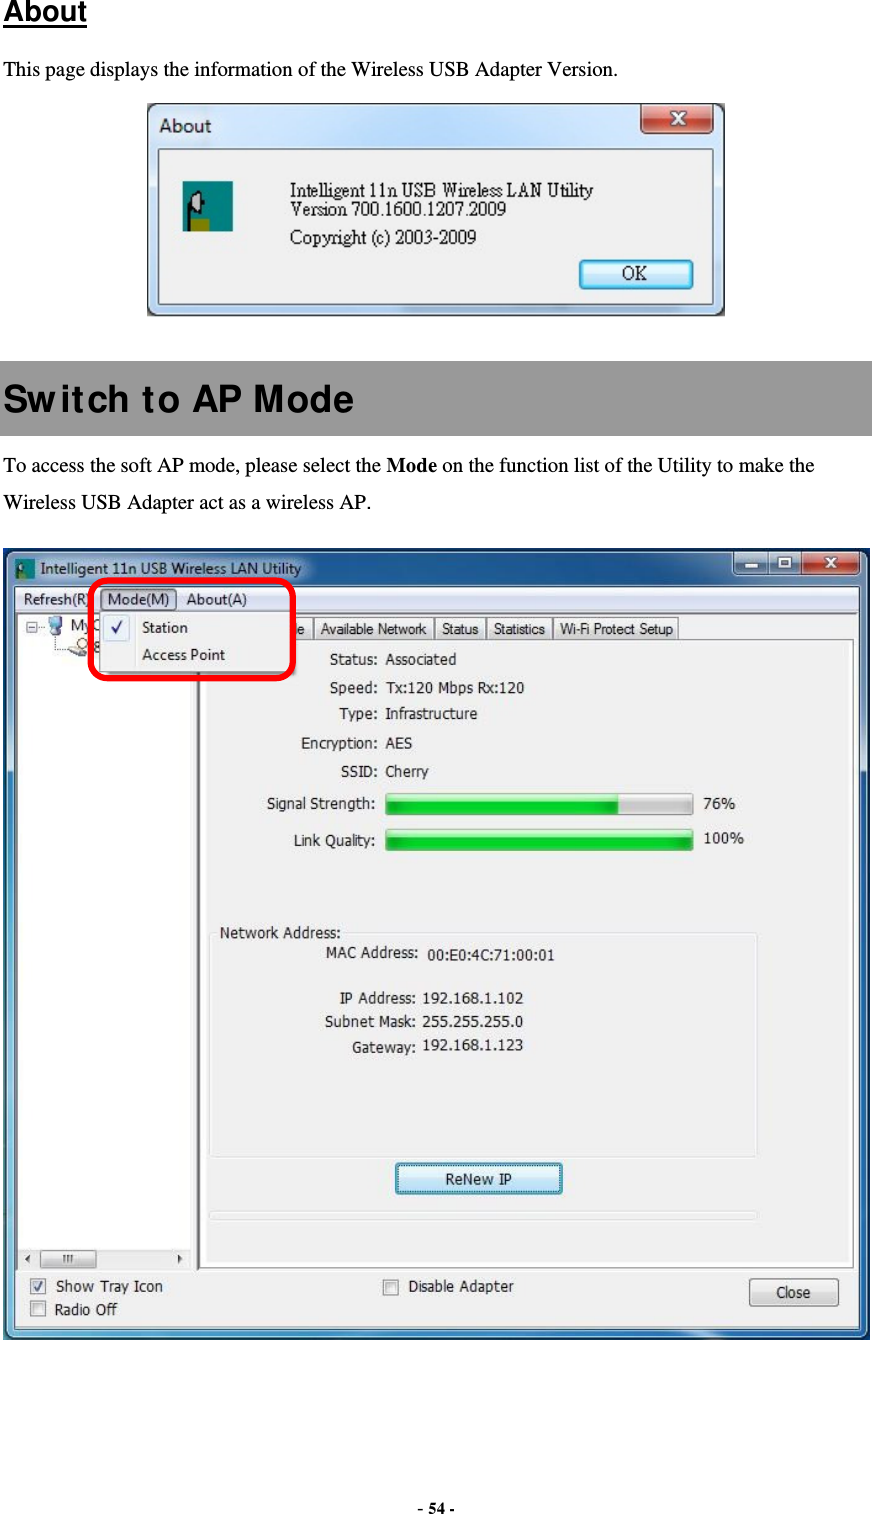  - 54 -  About This page displays the information of the Wireless USB Adapter Version.   Switch to AP Mode To access the soft AP mode, please select the Mode on the function list of the Utility to make the Wireless USB Adapter act as a wireless AP.   